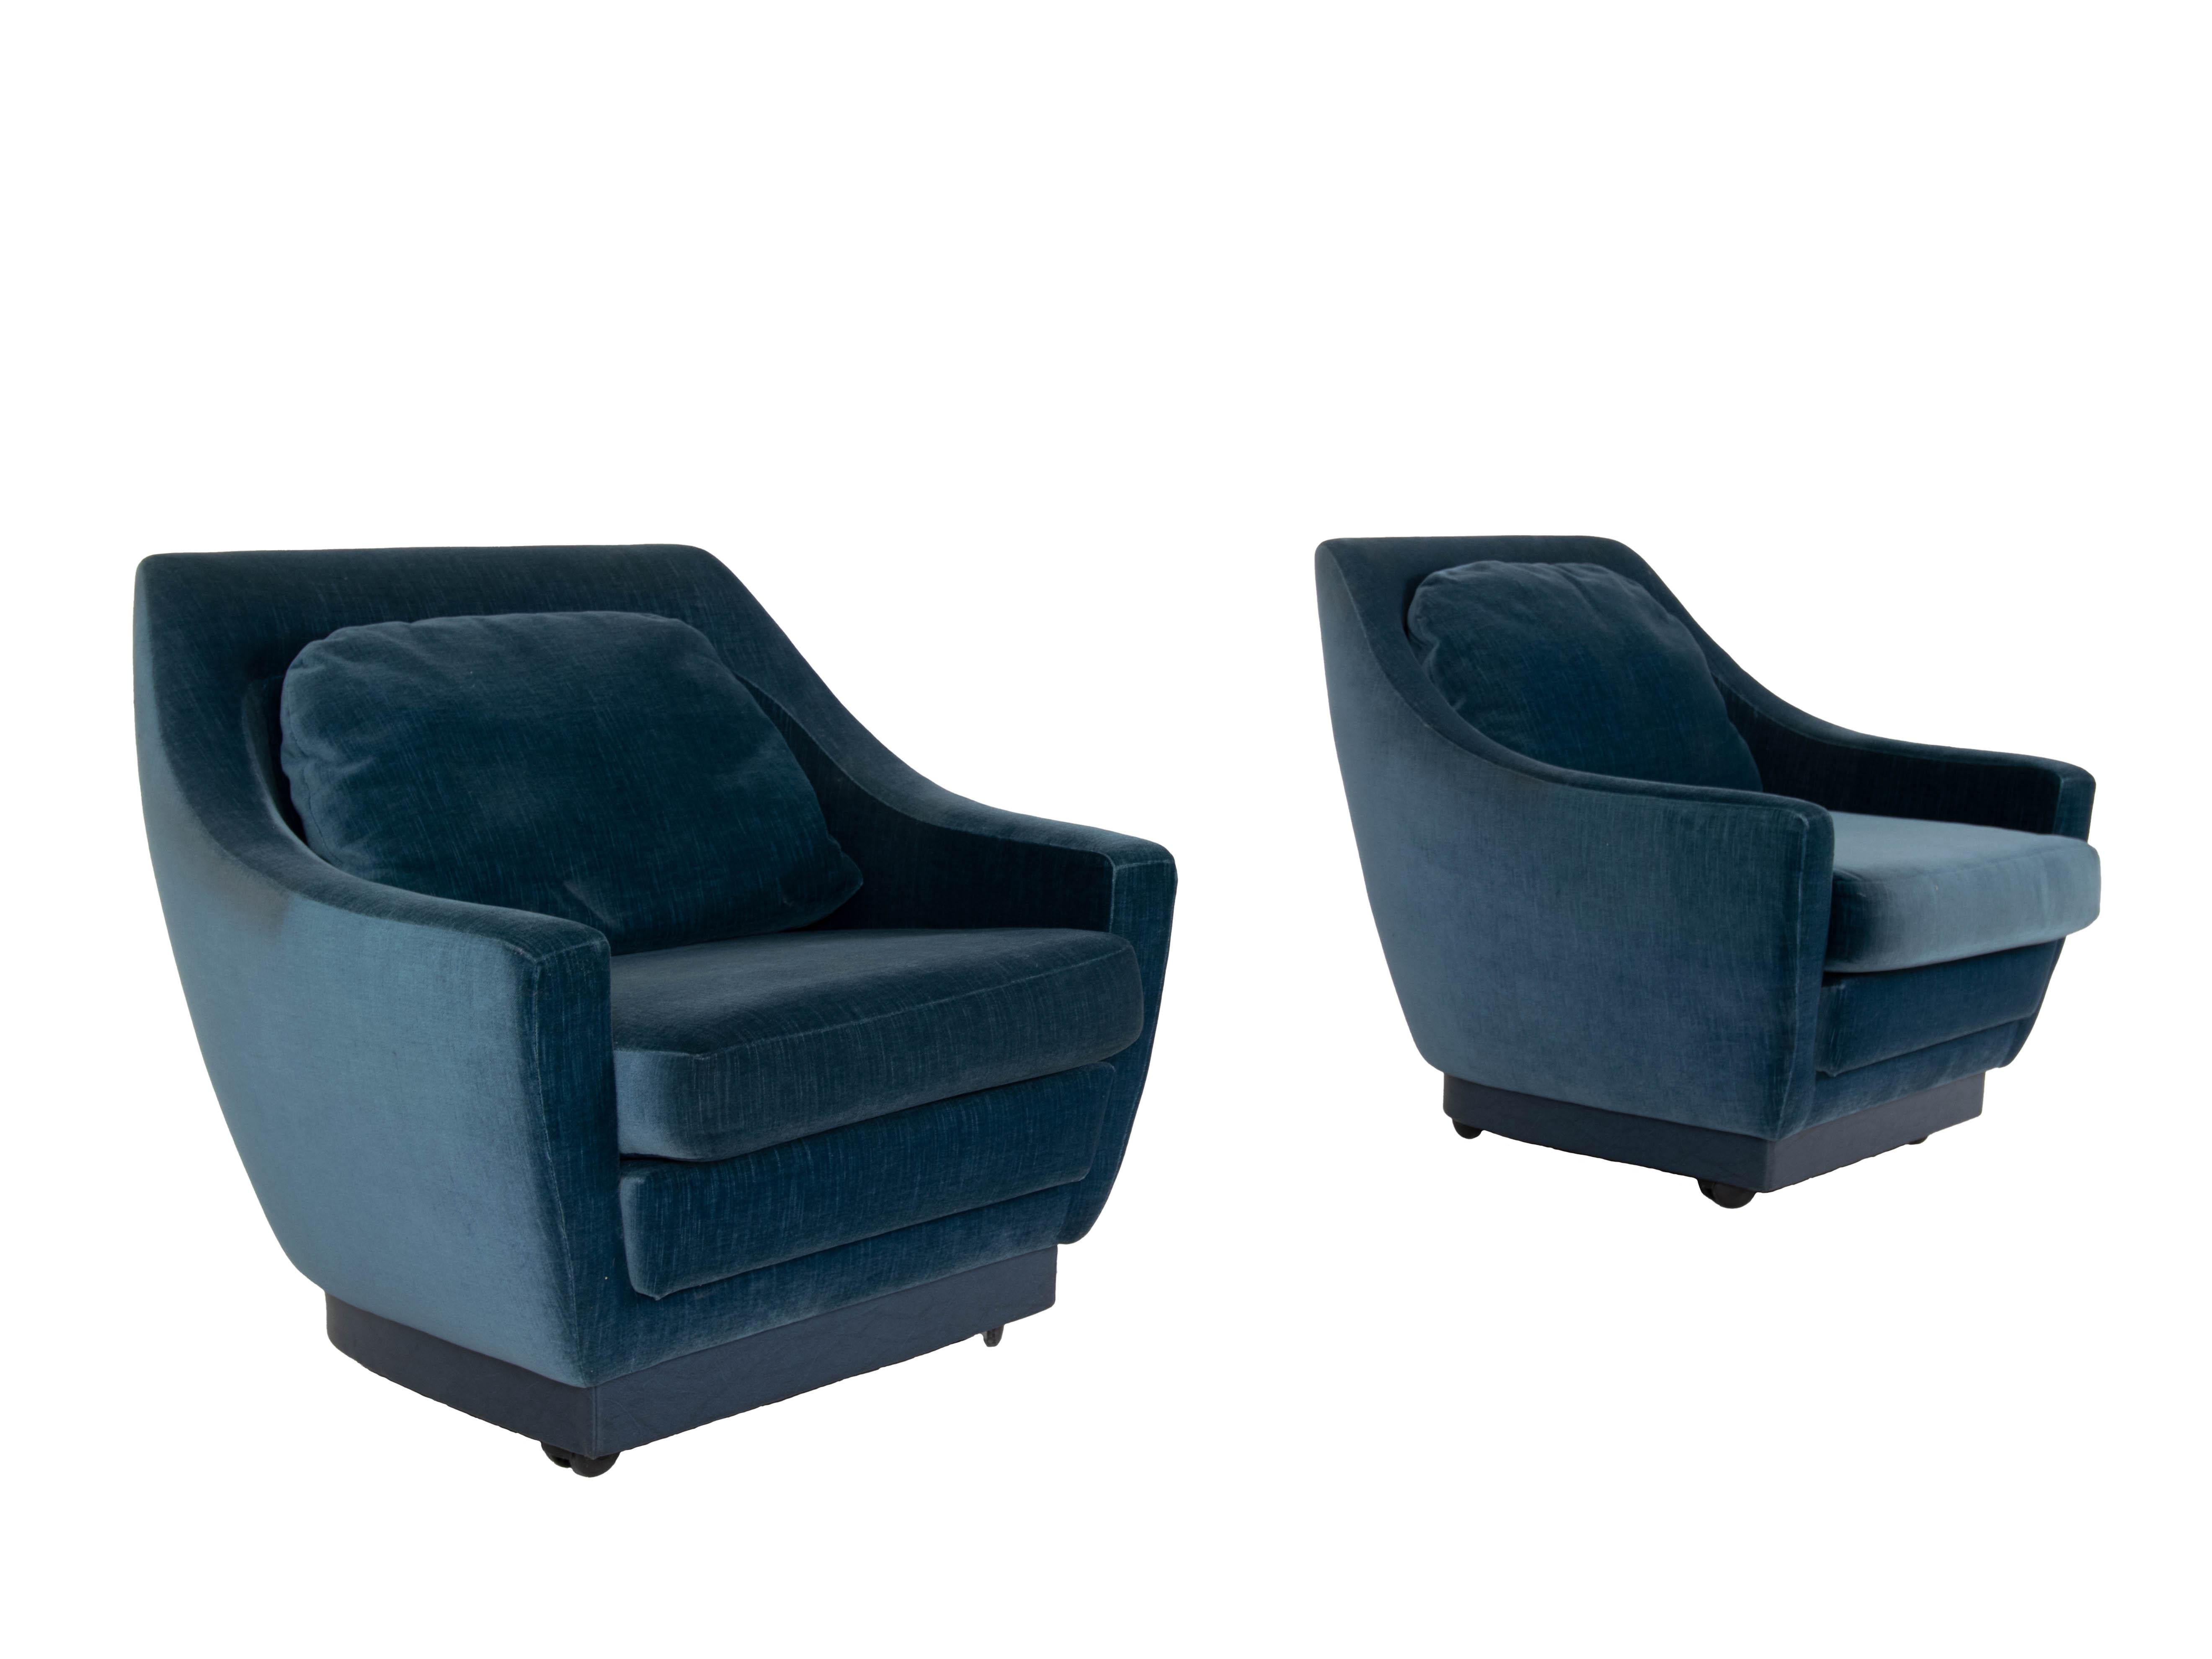 An impressive set of Art Deco style two lounge chairs. This set is very professionally upholstered in 1988 by 'Bröring Interieur B.V'. in Amsterdam. It has blue velvet fabric with an edge on the bottom in blue leather. The chairs are very